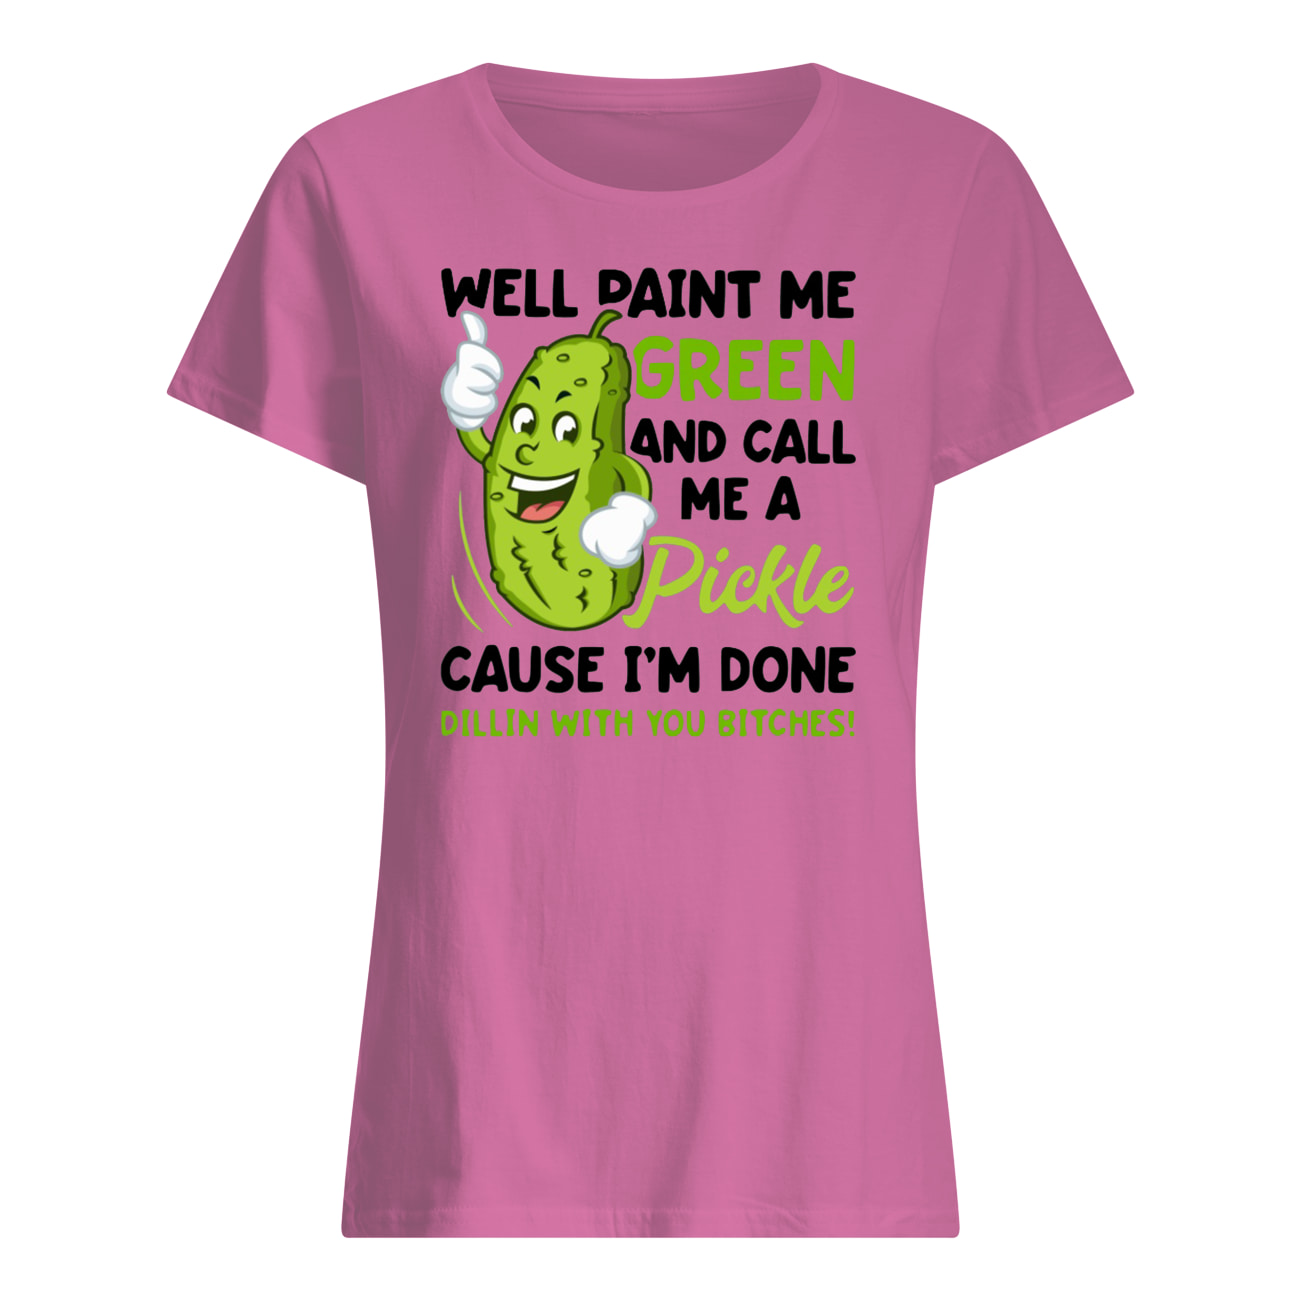 Well paint me green and call me a pickle because I’m done dillin’ with you bitches womens shirt